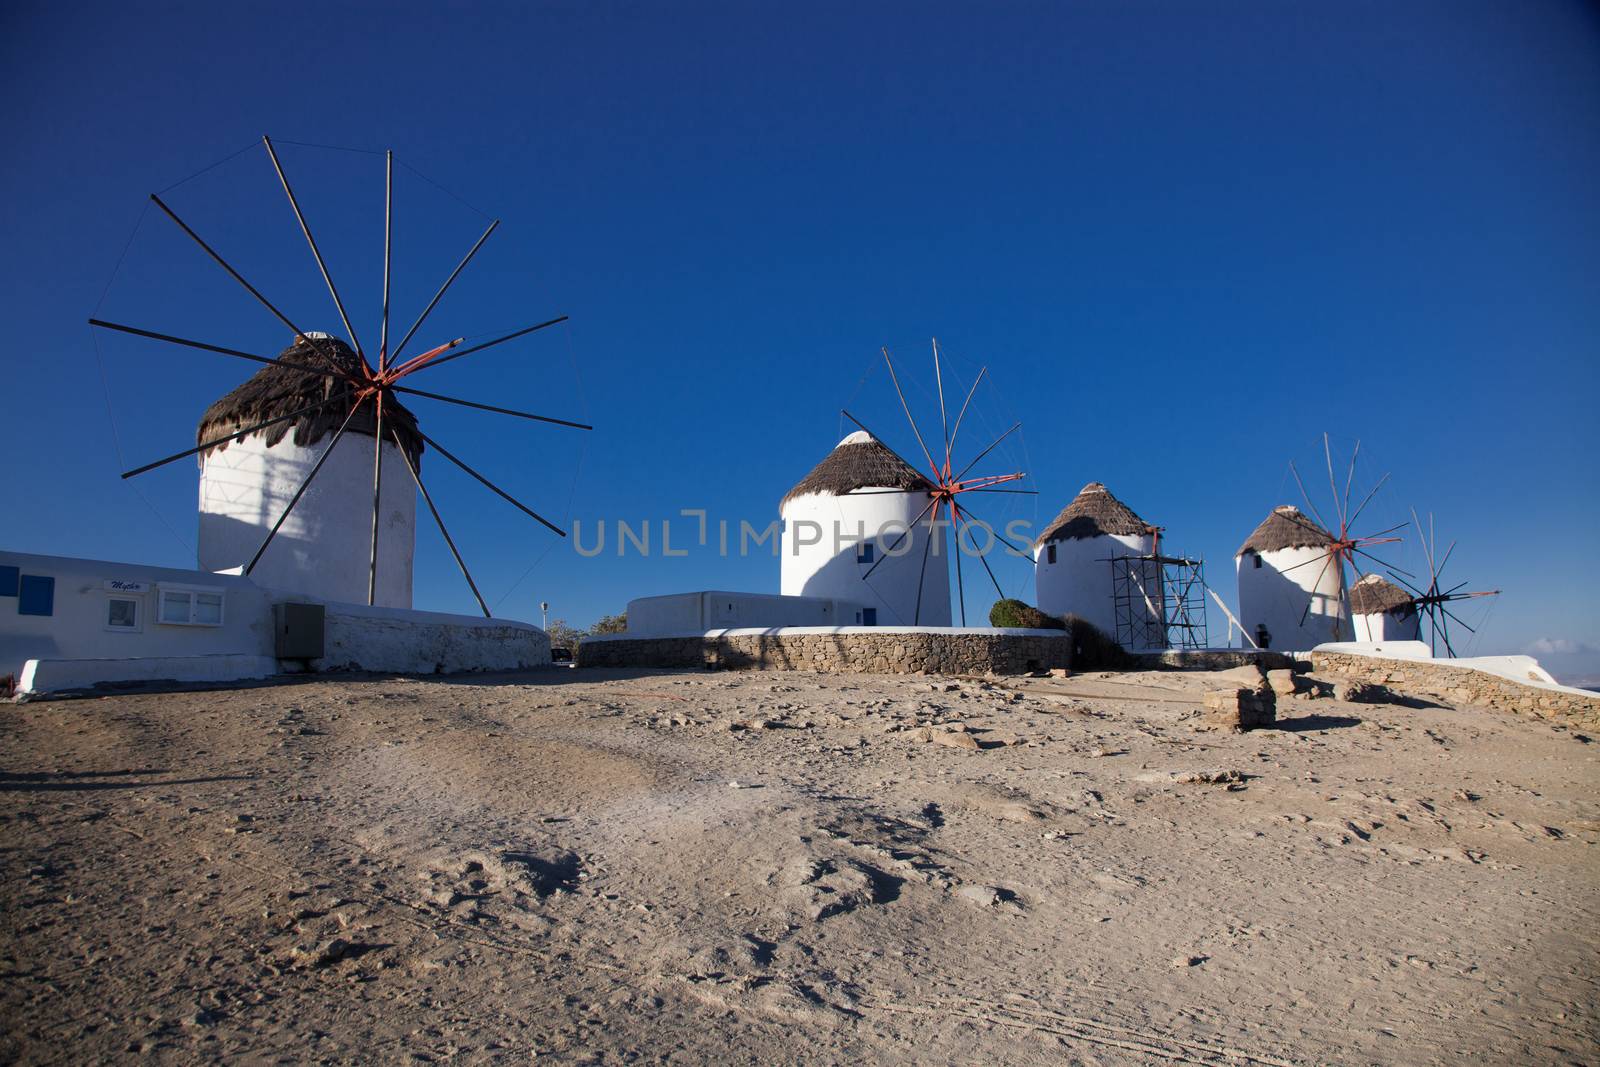 famous view  Traditional windmills on the island Mykonos, Greece by melis